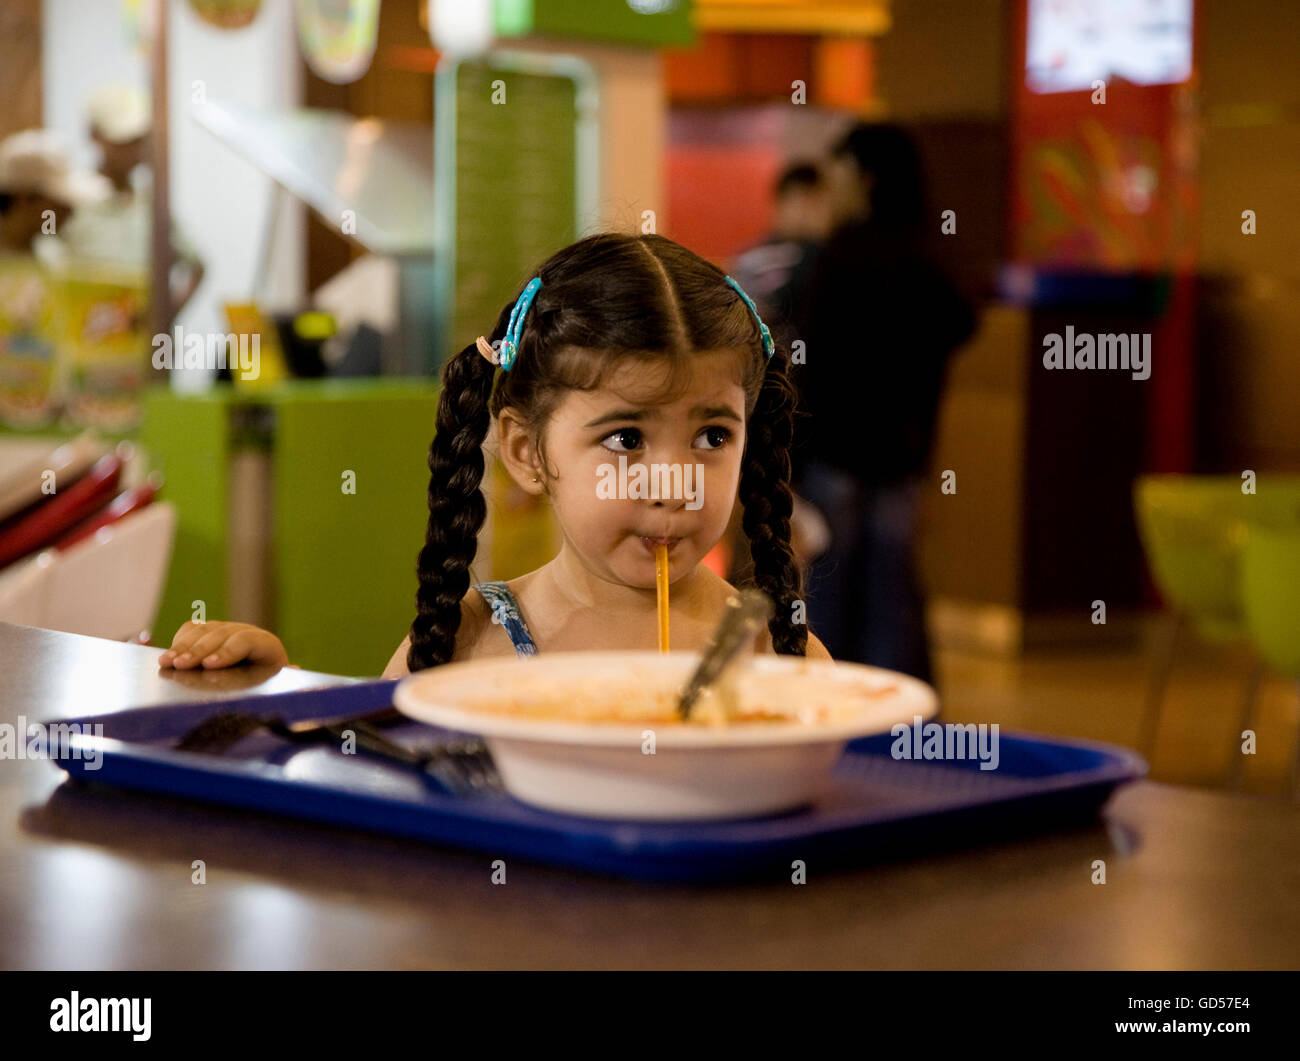 A little girl at the Ambi Mall Stock Photo